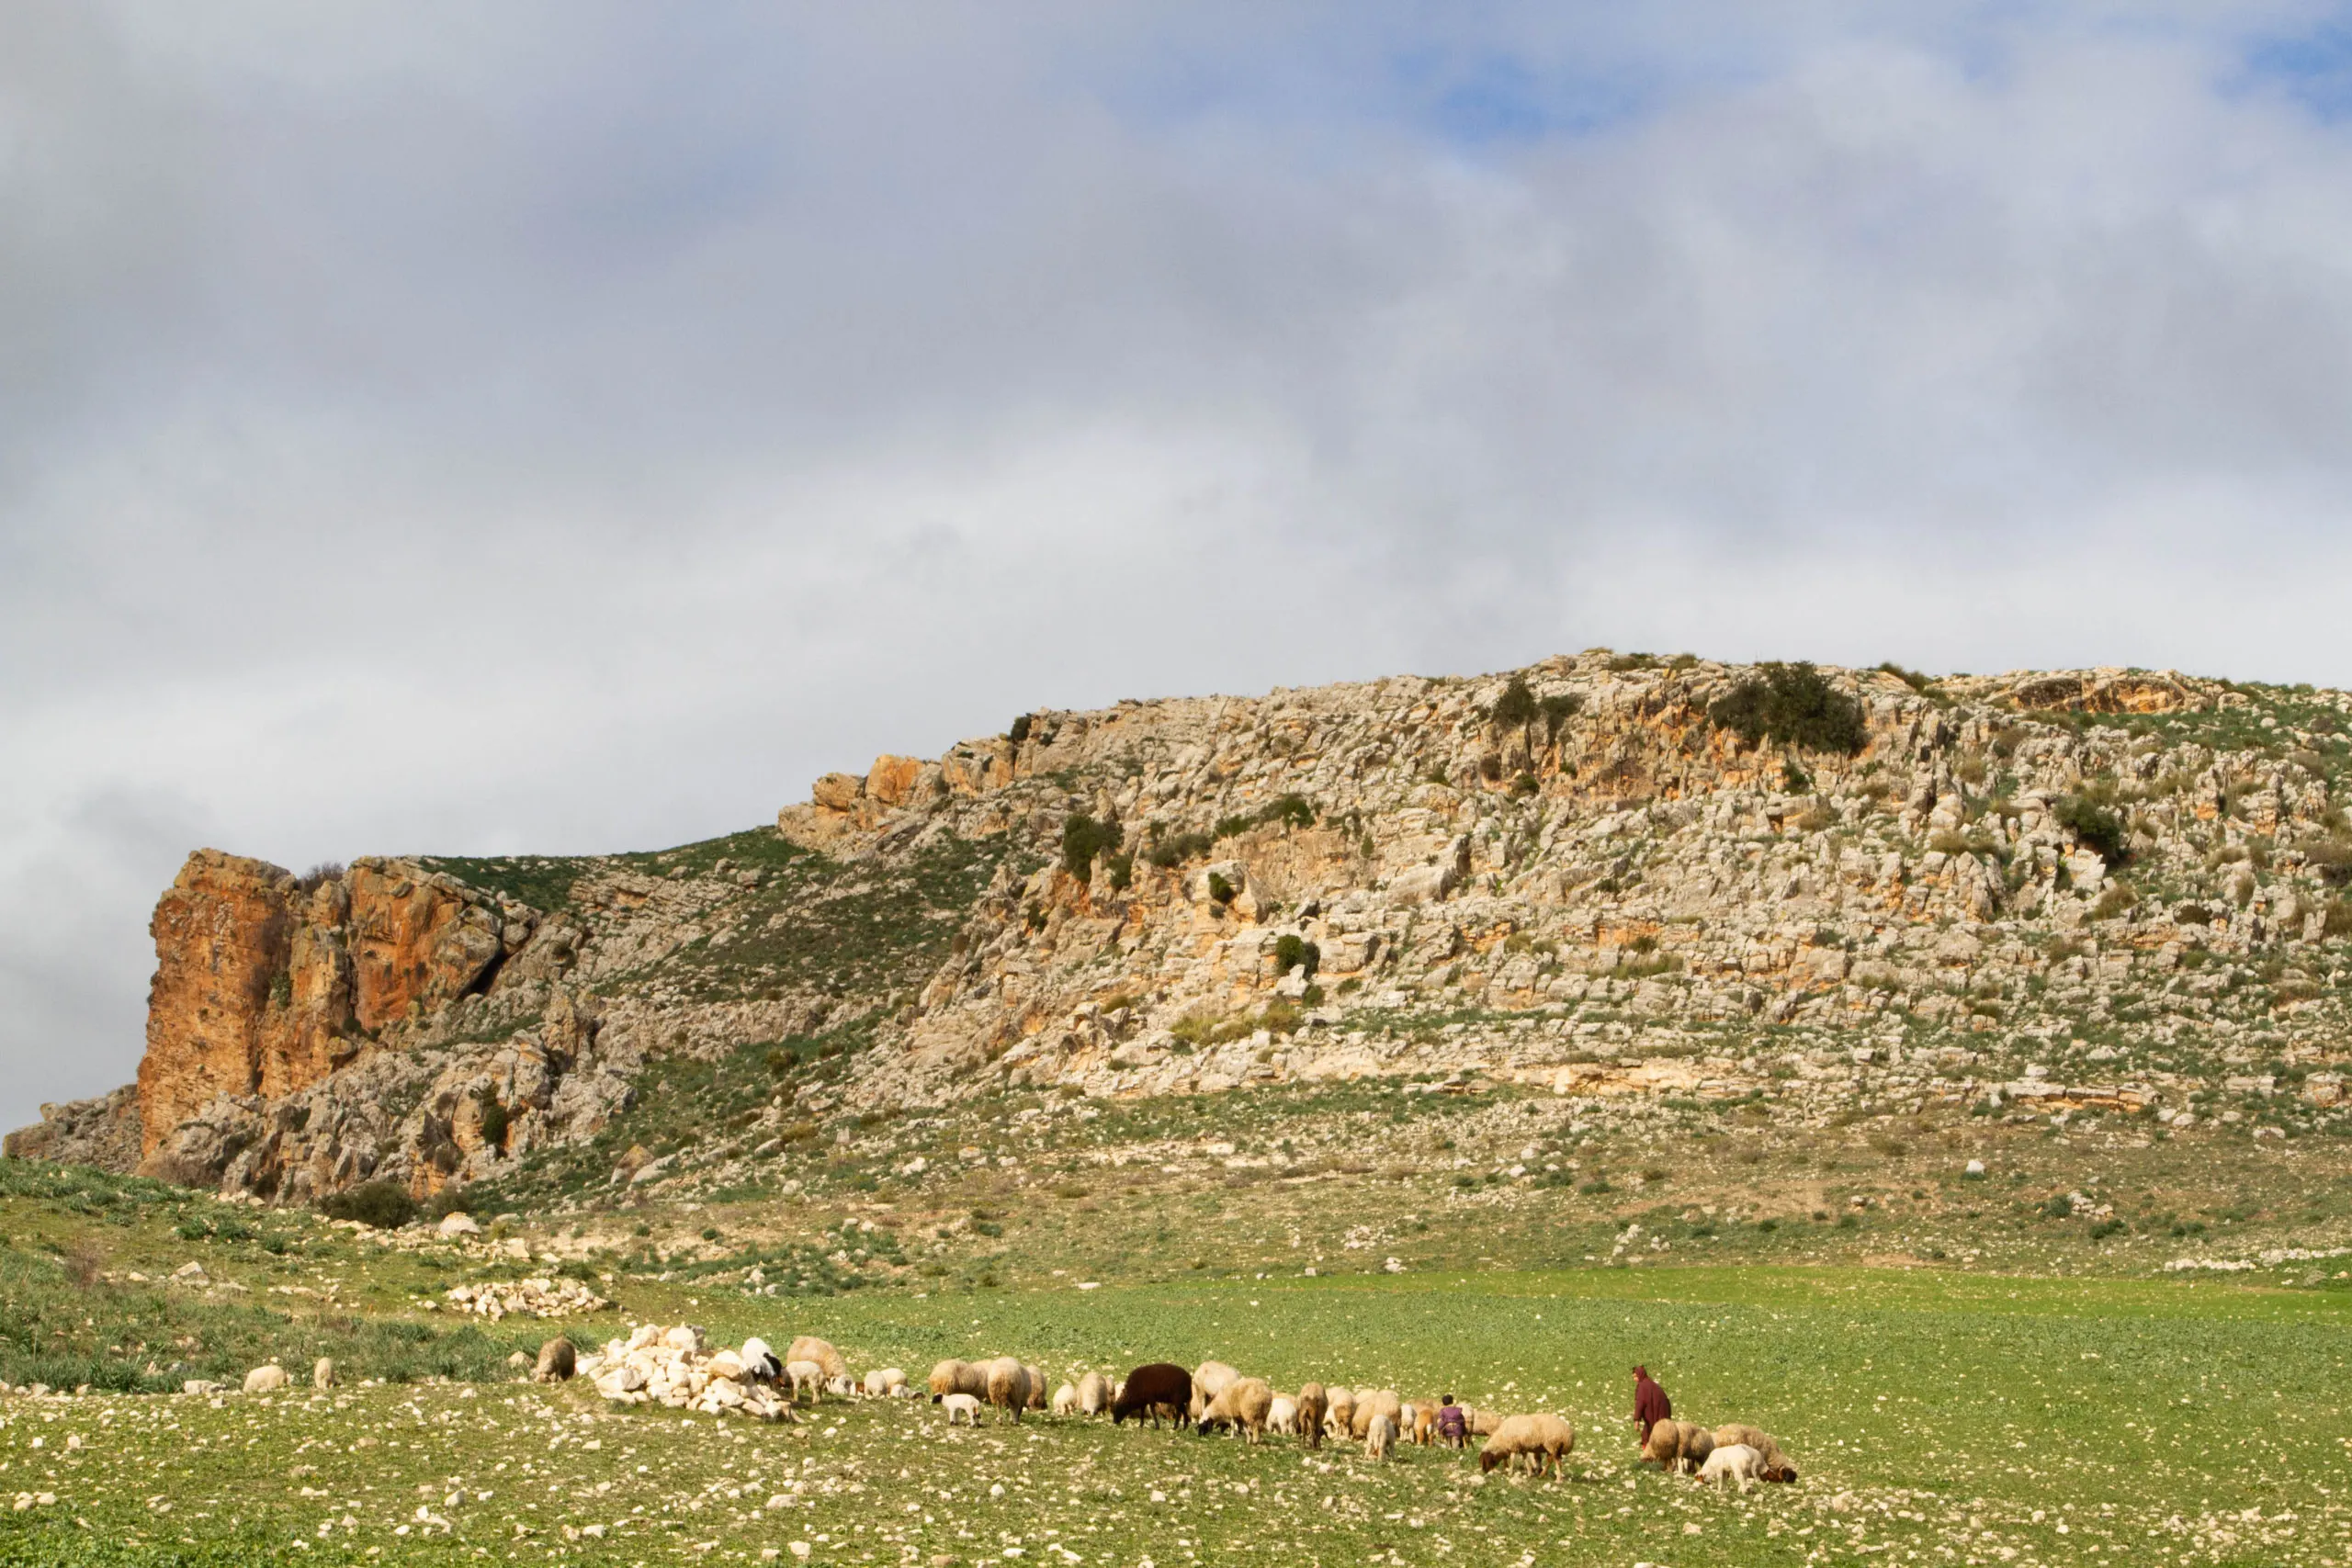 Visit Tunisia and get out into the countryside to enjoy views such as this flock of sheep and their shepherd.